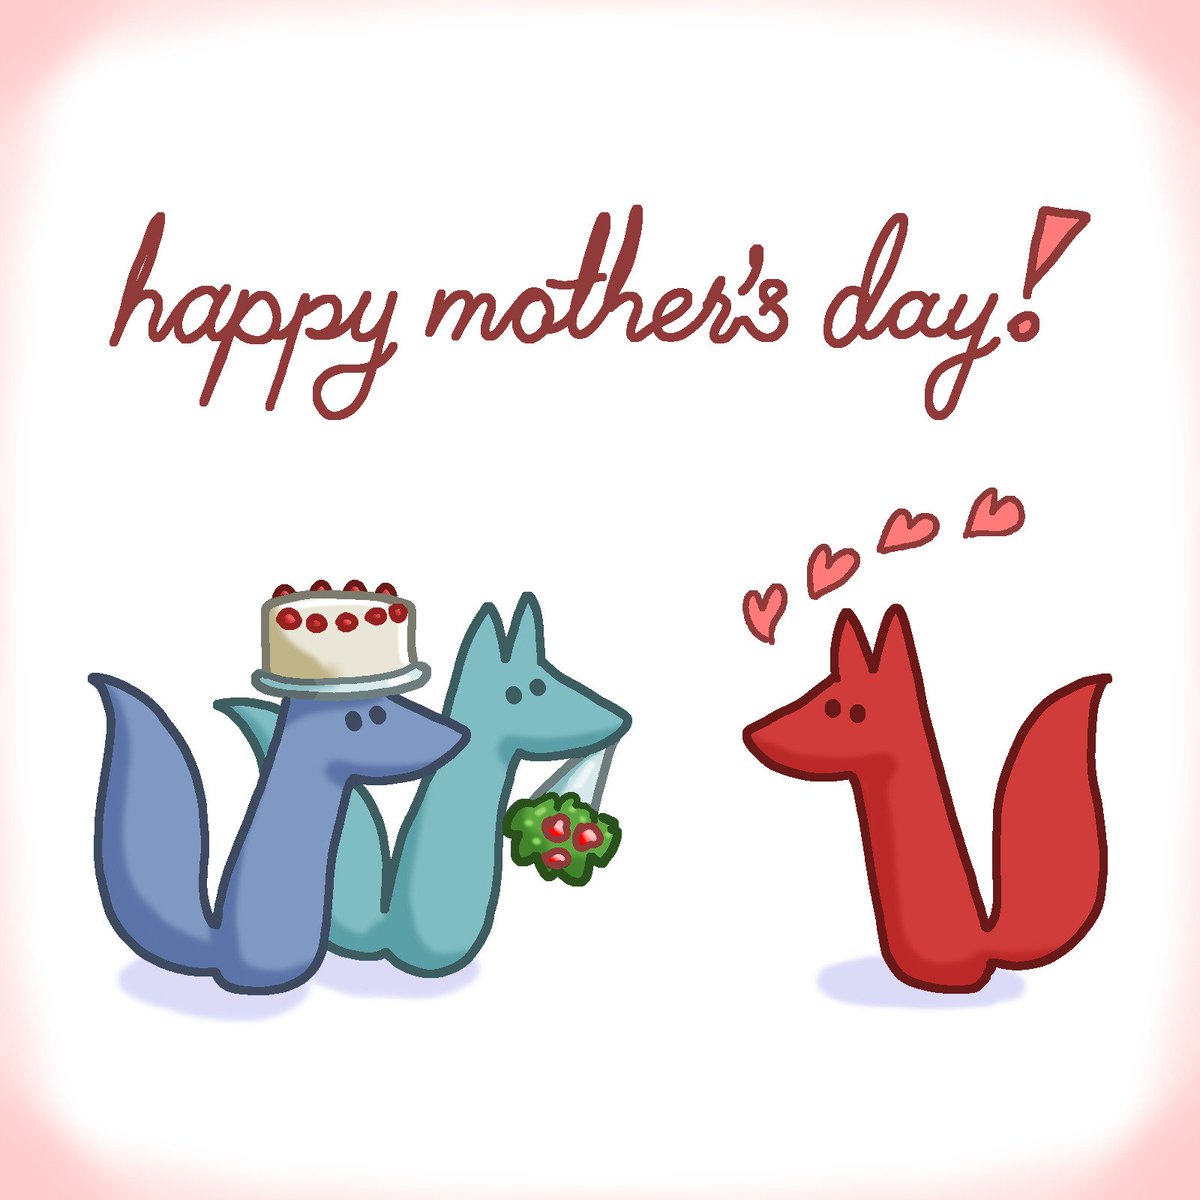 We are celebrating mother's day today!